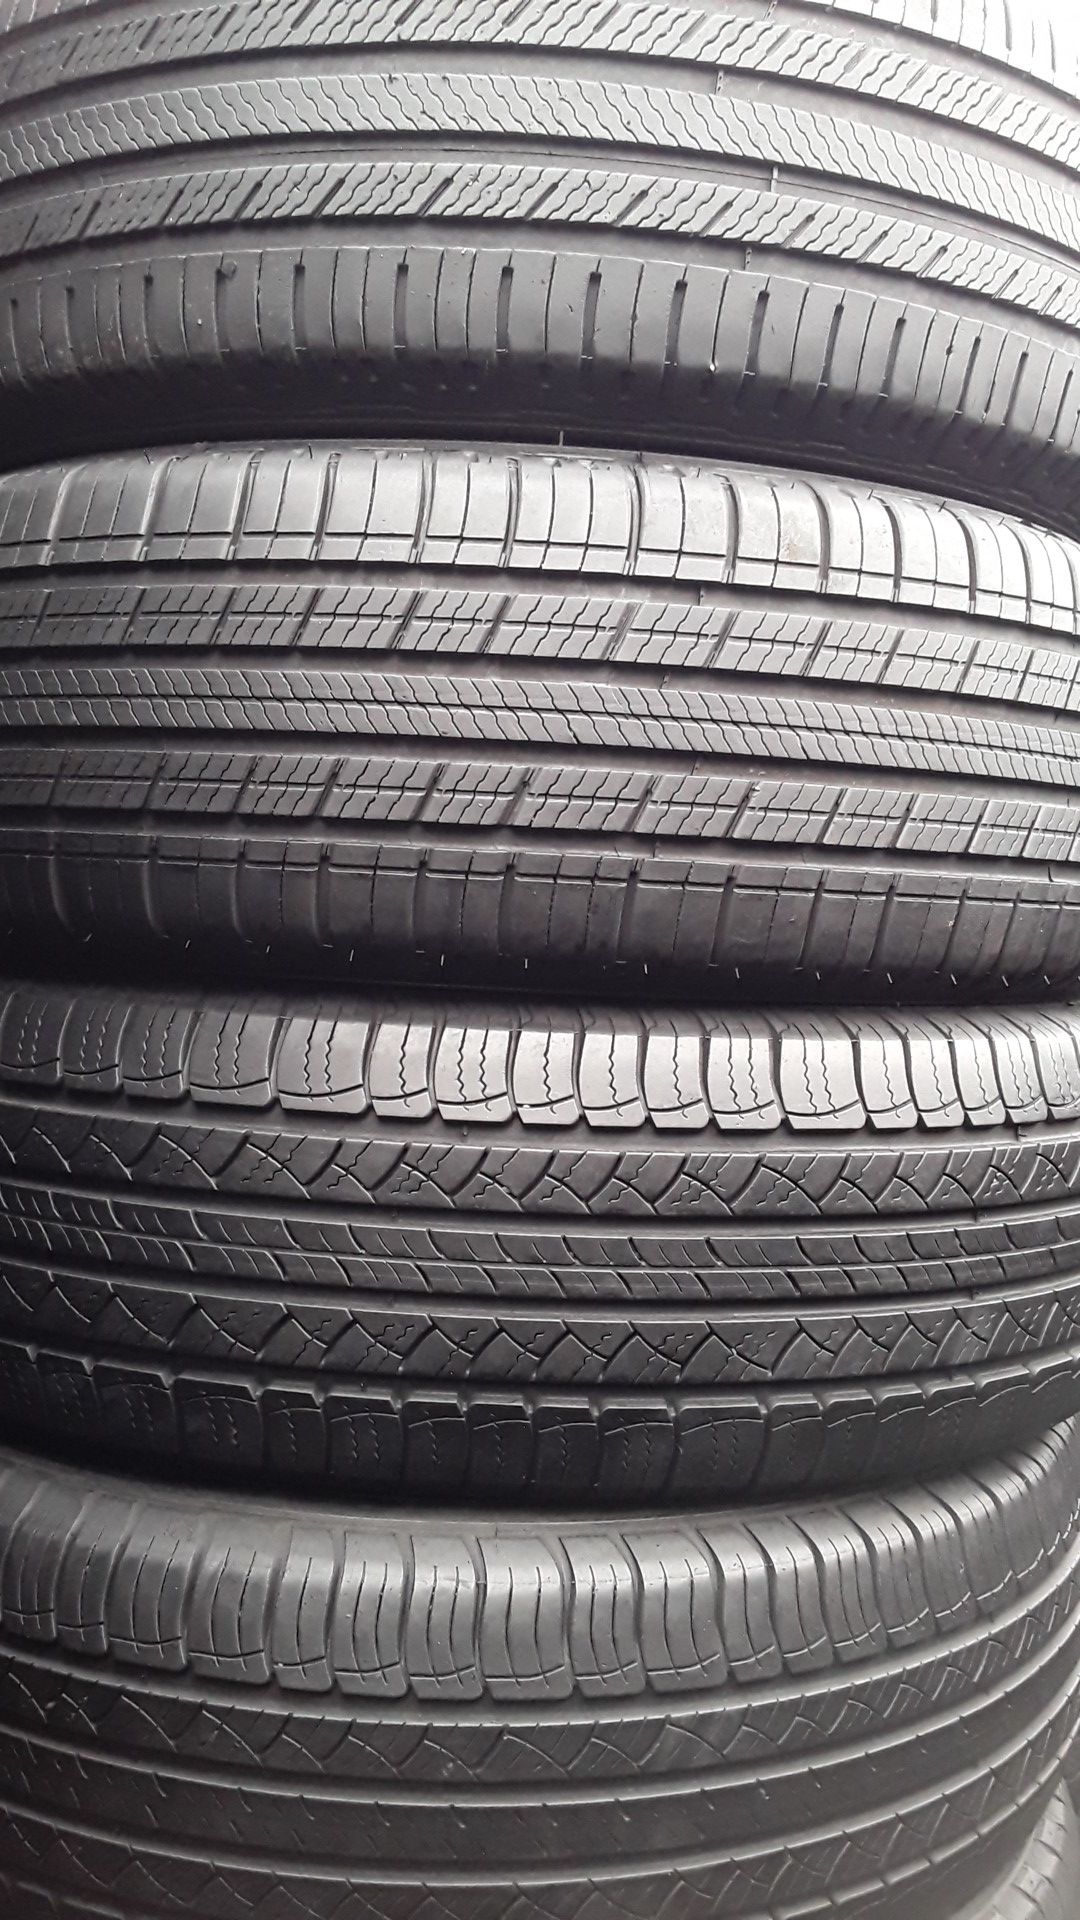 Four set of michelin tires for sale225/65/17